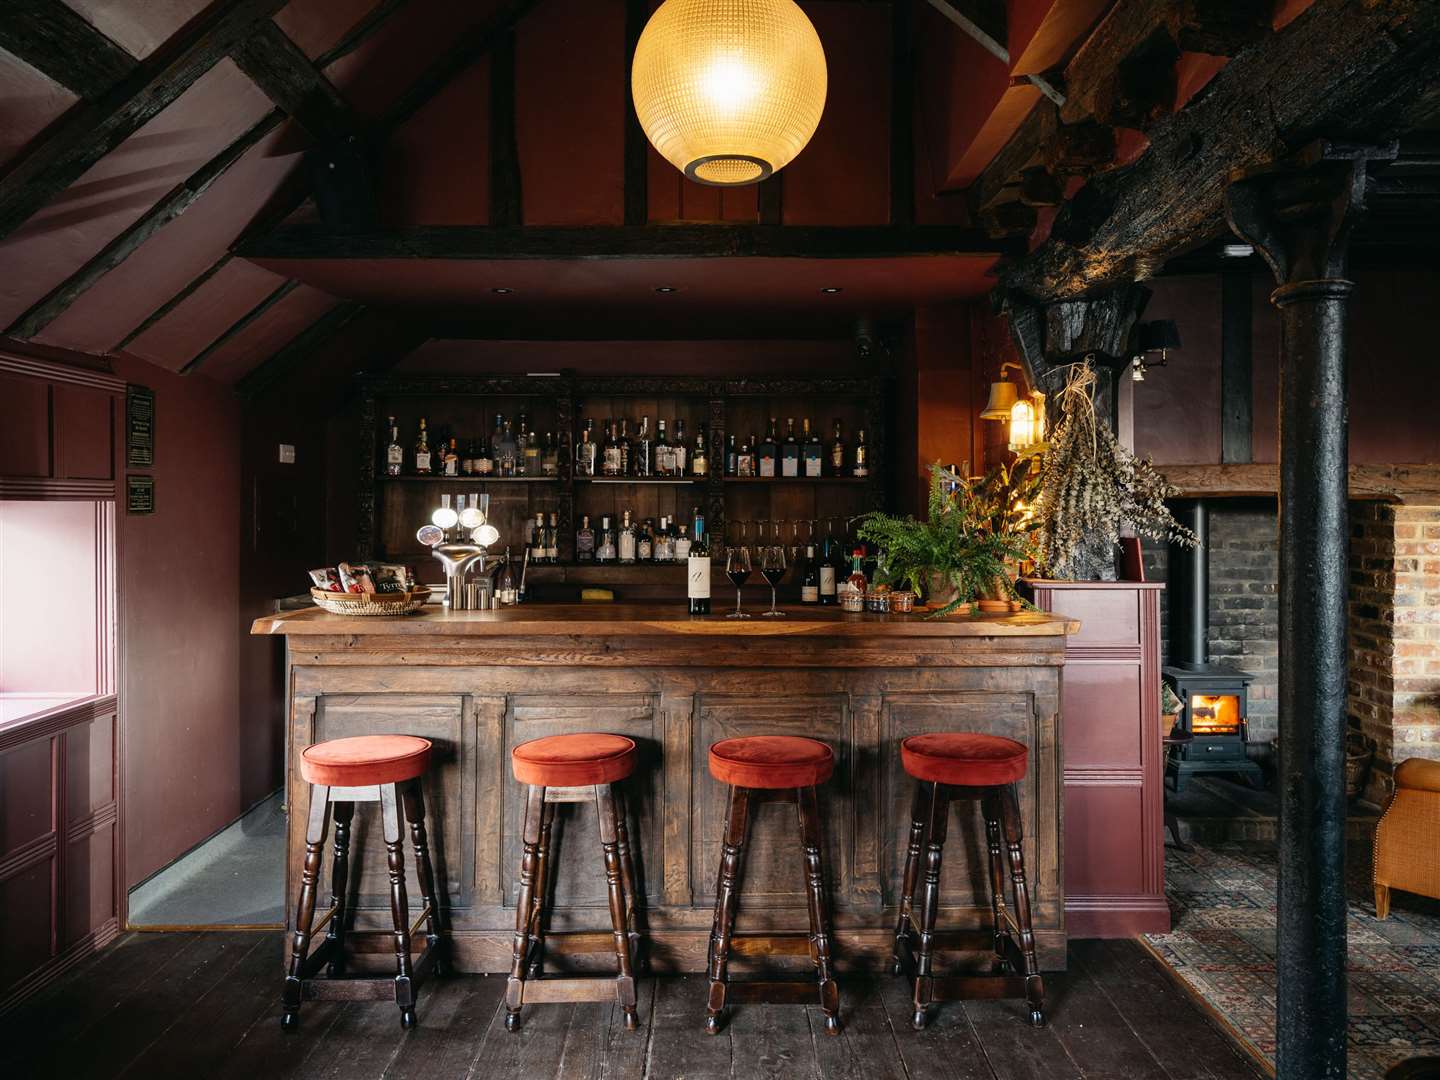 The pub opened in October. Picture: Mark Anthony Fox